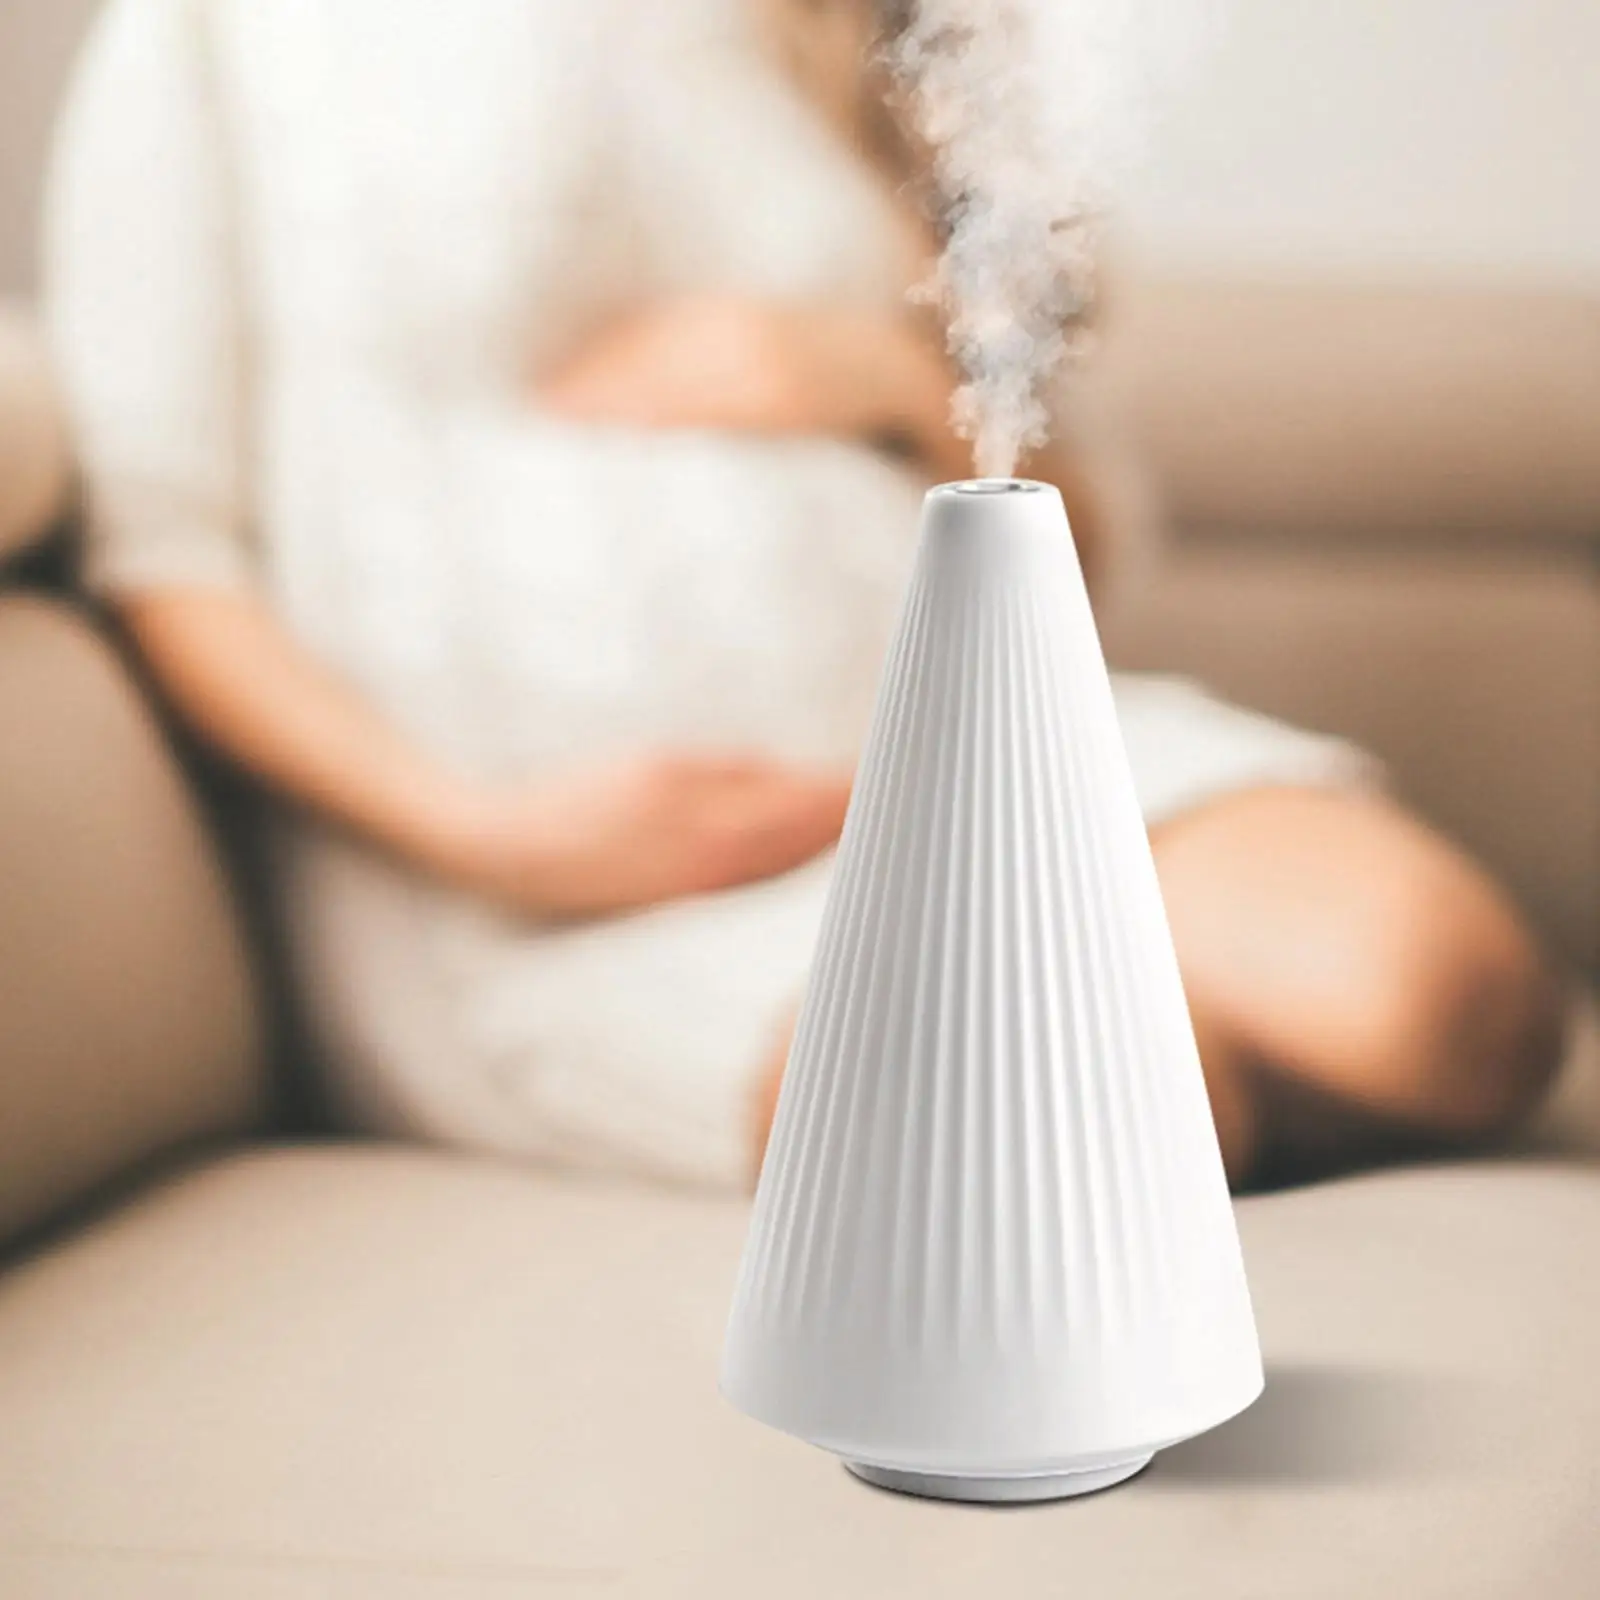 Personal USB Humidifier Aroma Diffuser Auto Shut Off 250ml Water Tank Small Humidifier Portable Humidifier for Home Car Hotel